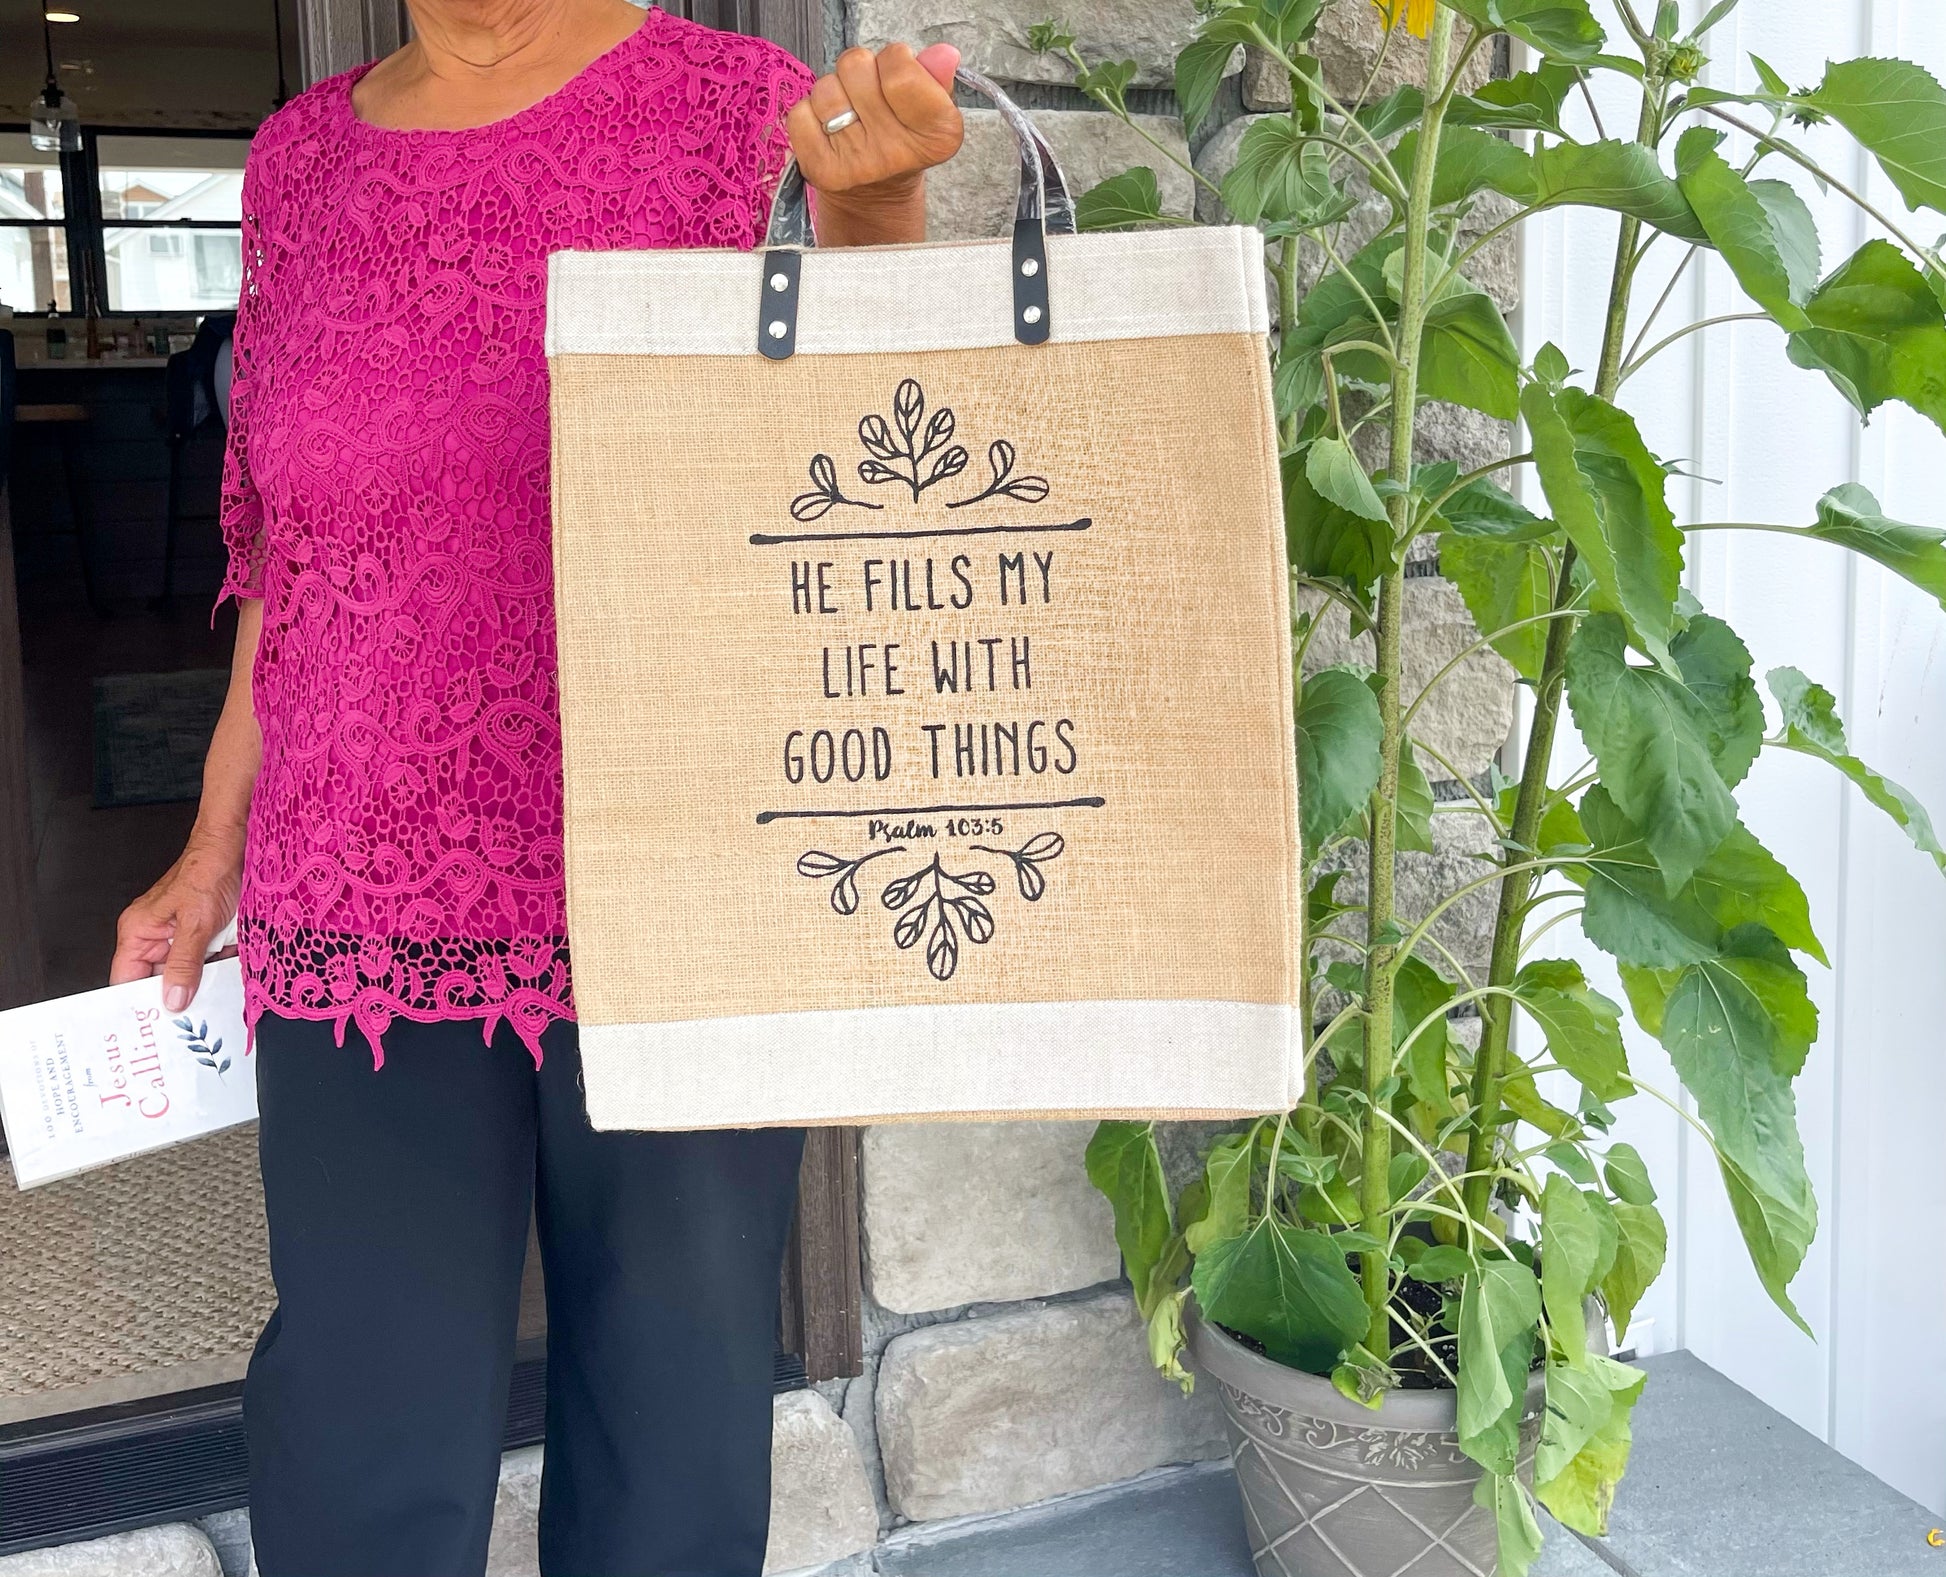 clothing bag for travel | large tote bags | grocery bag tote | christian bags and totes | inspirational totes | Christian fashion | Believe tote bag | Faith gifts | Christian gifts | Holiday fashion | Market tote bag | Farmers market tote | He fills my life with good things